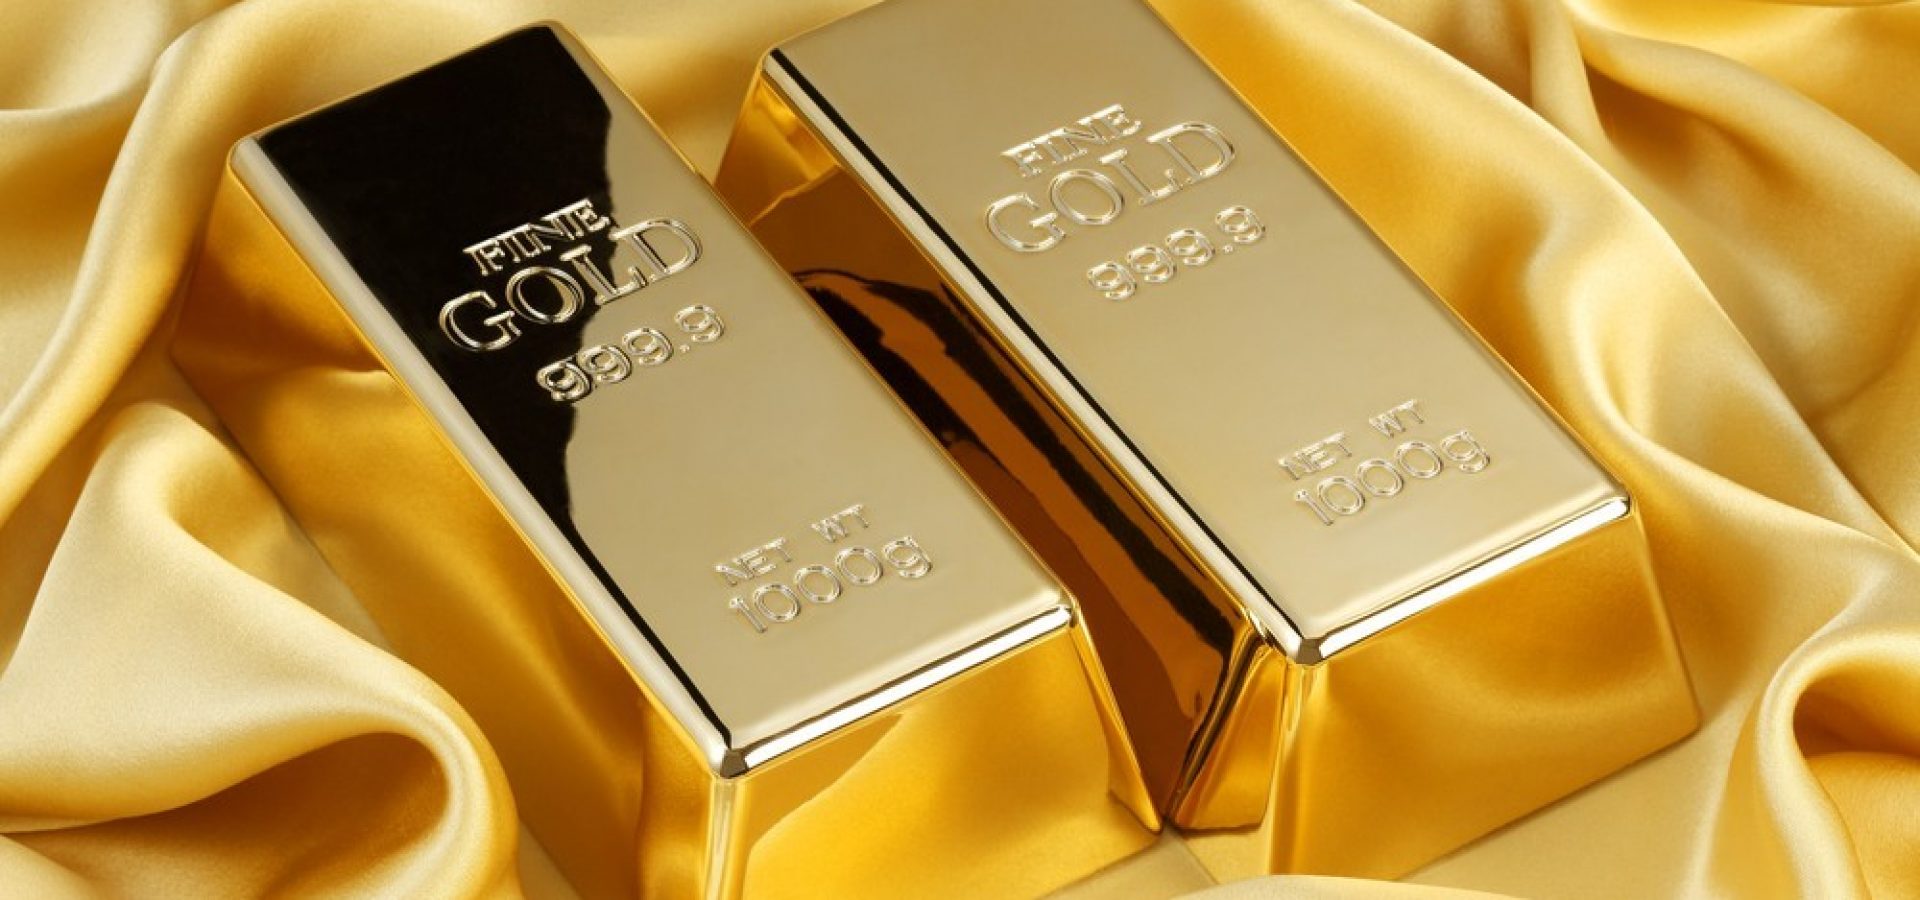 Wibest – Spot Gold Prices: Two gold bars over a gold clothe.